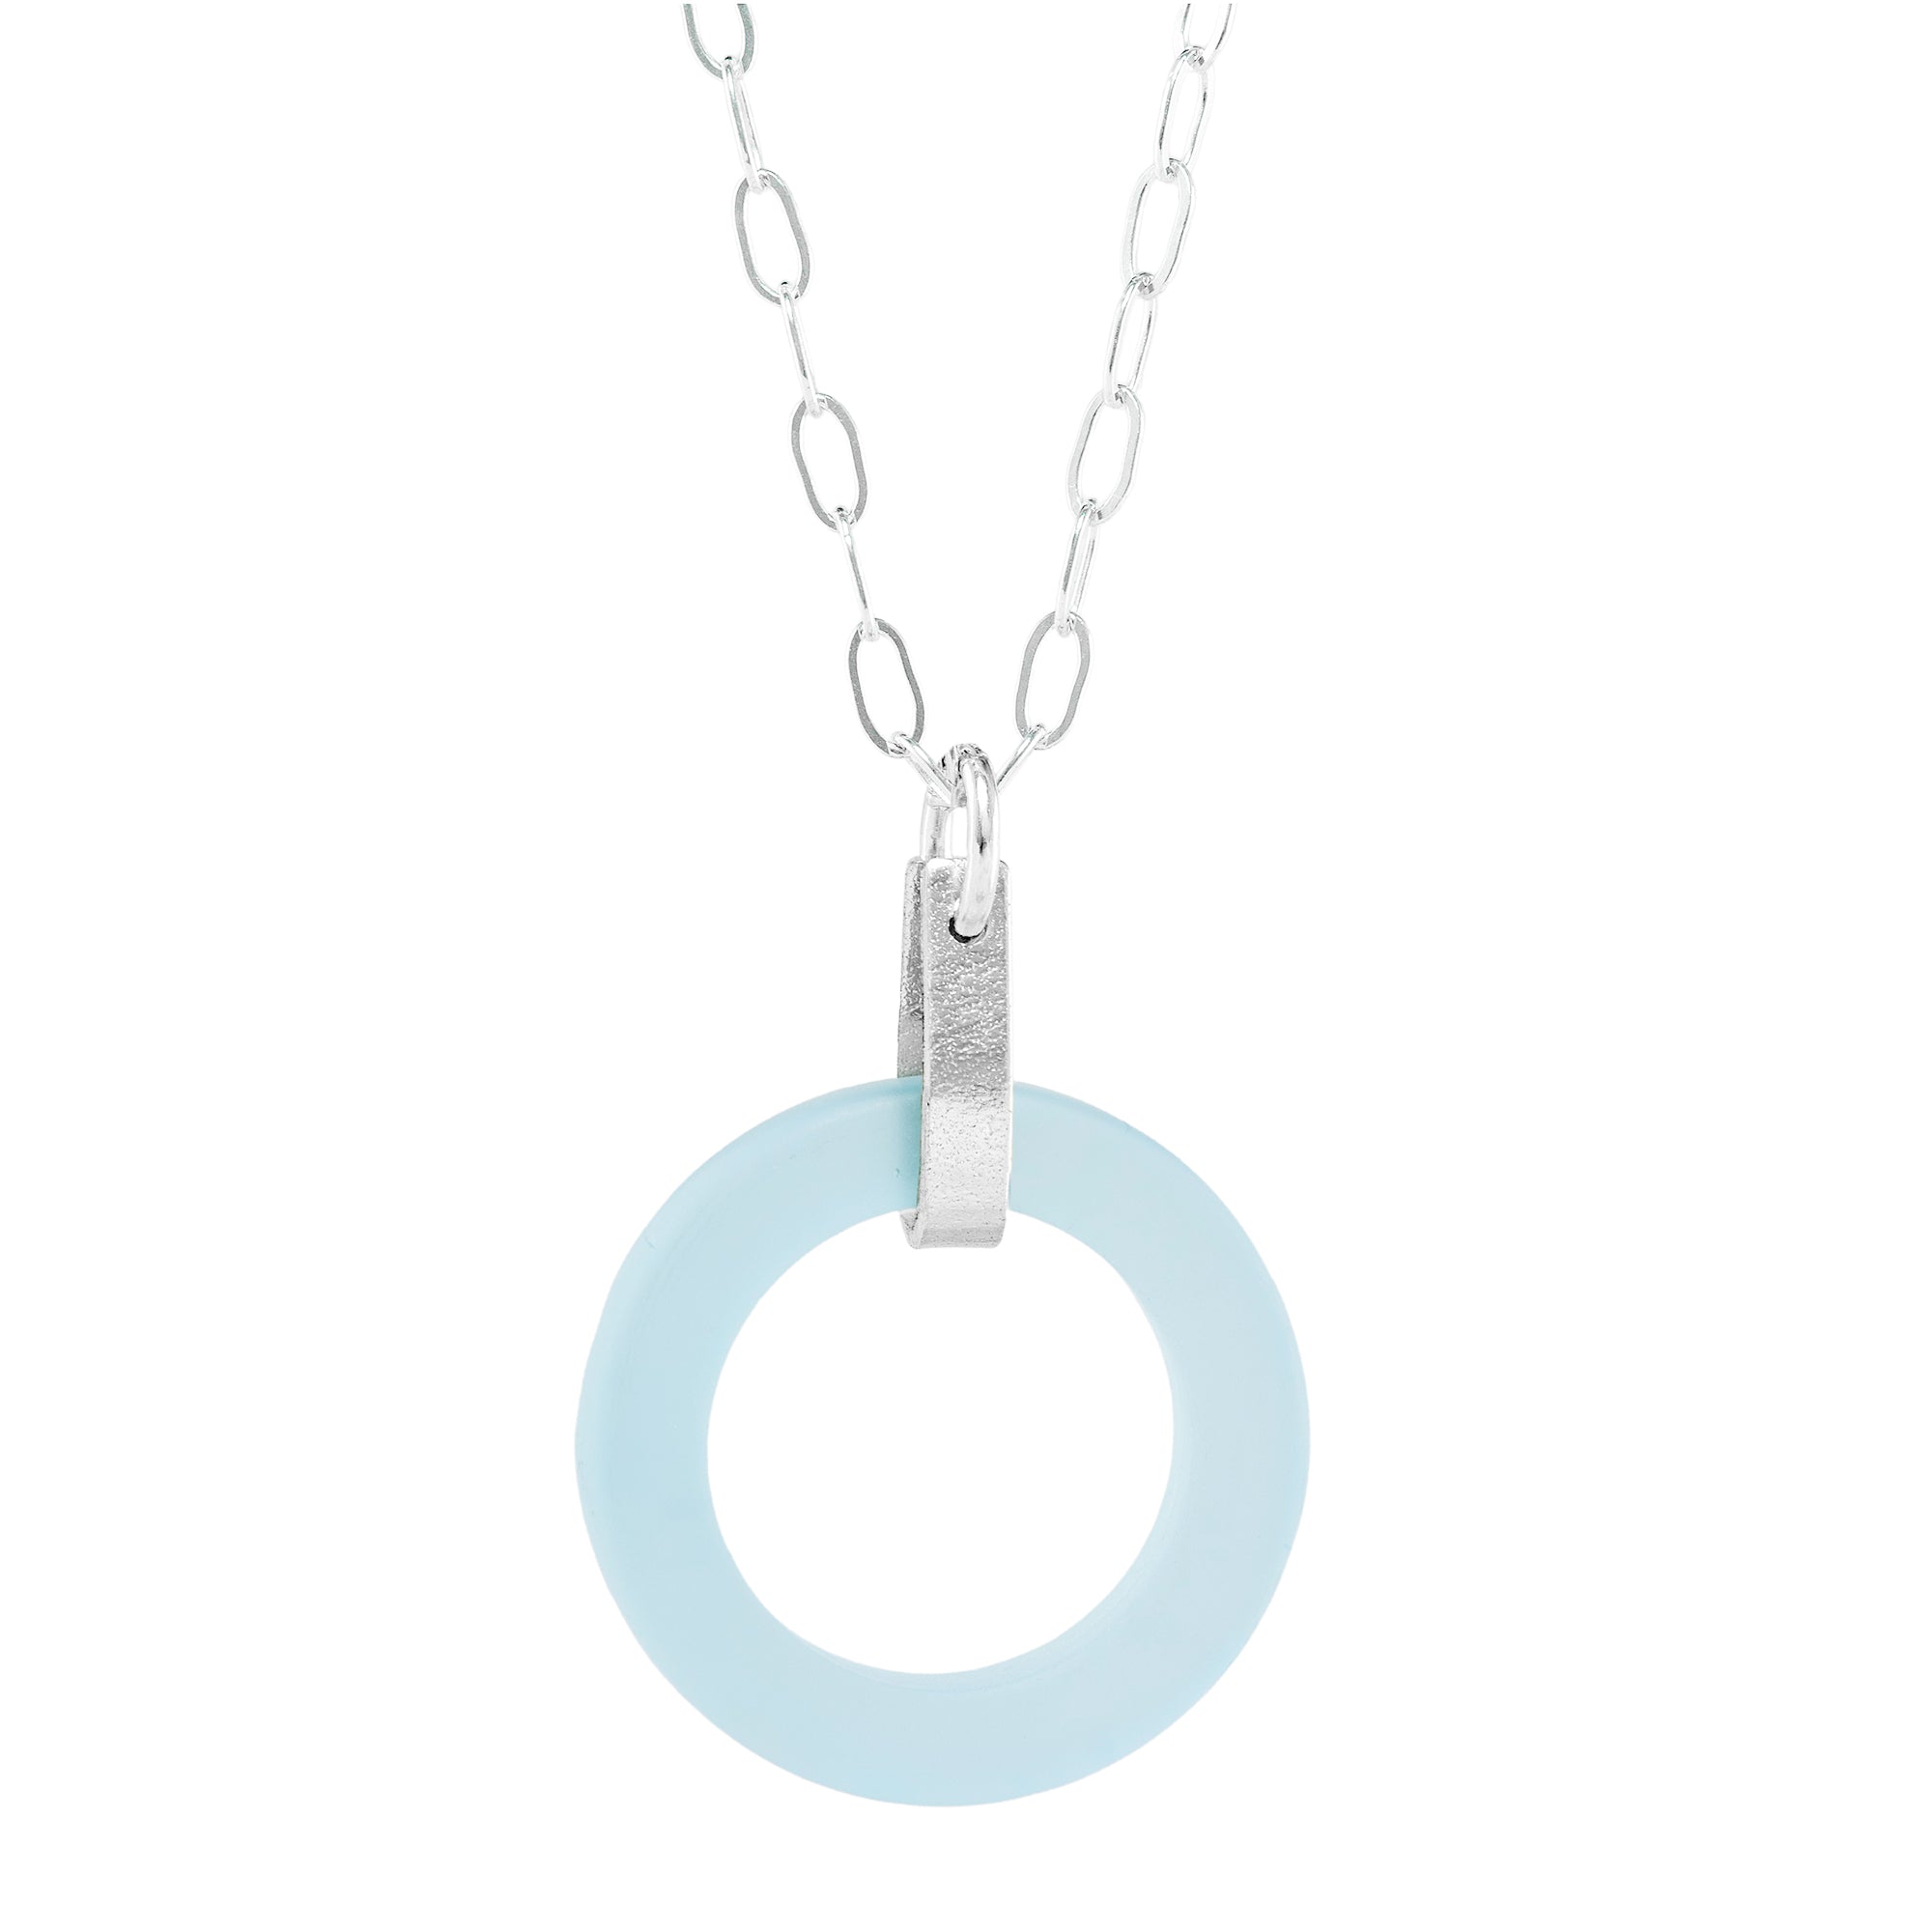 Light Baby Blue Round Recycled Glass Open Circle and Sterling Silver Strap Style Pendant Necklace